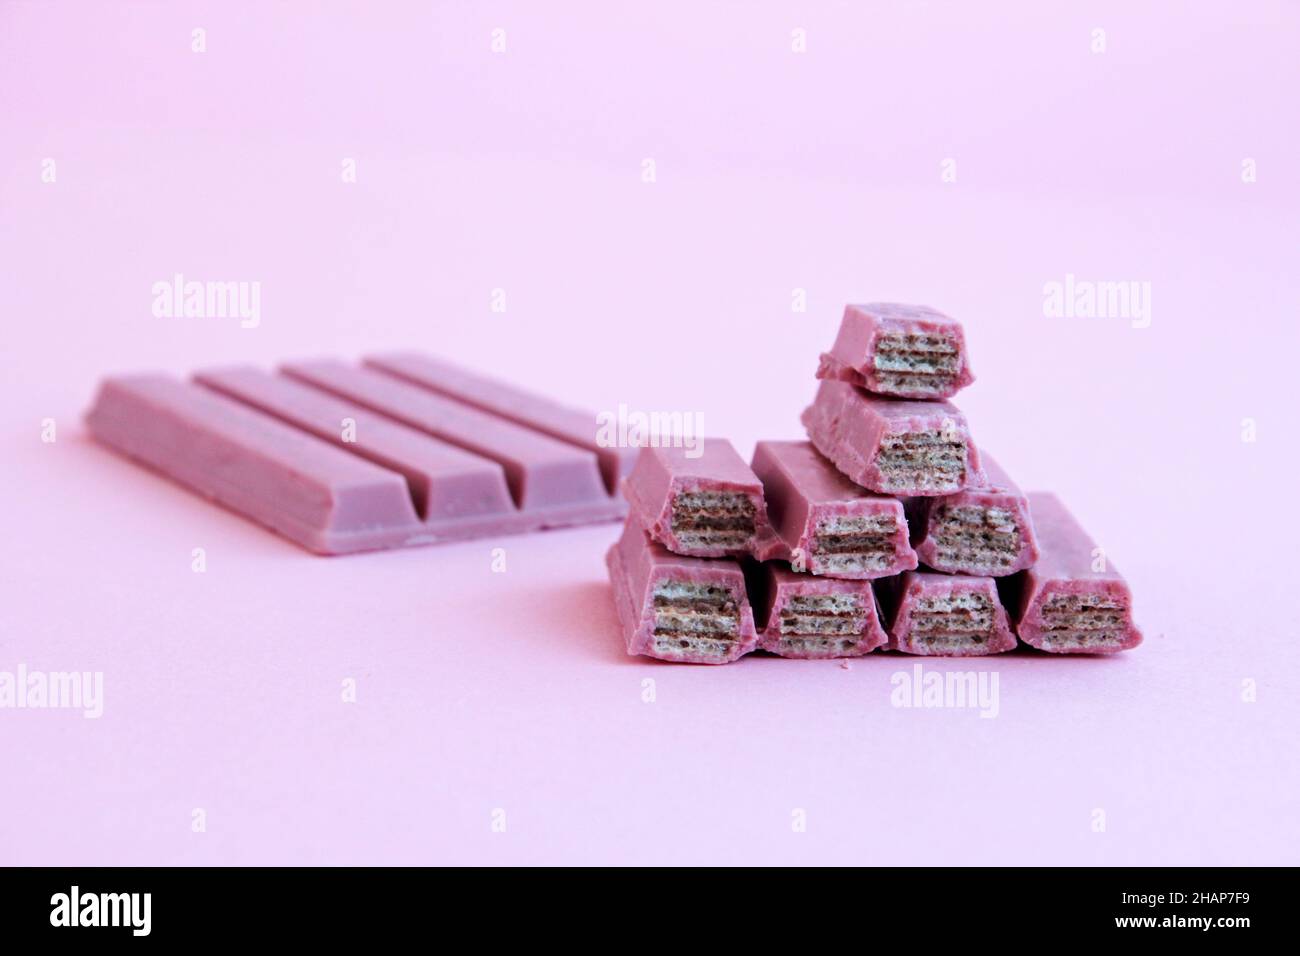 Ruby chocolate covered wafers sliced on pastel pink ground with copy space Stock Photo